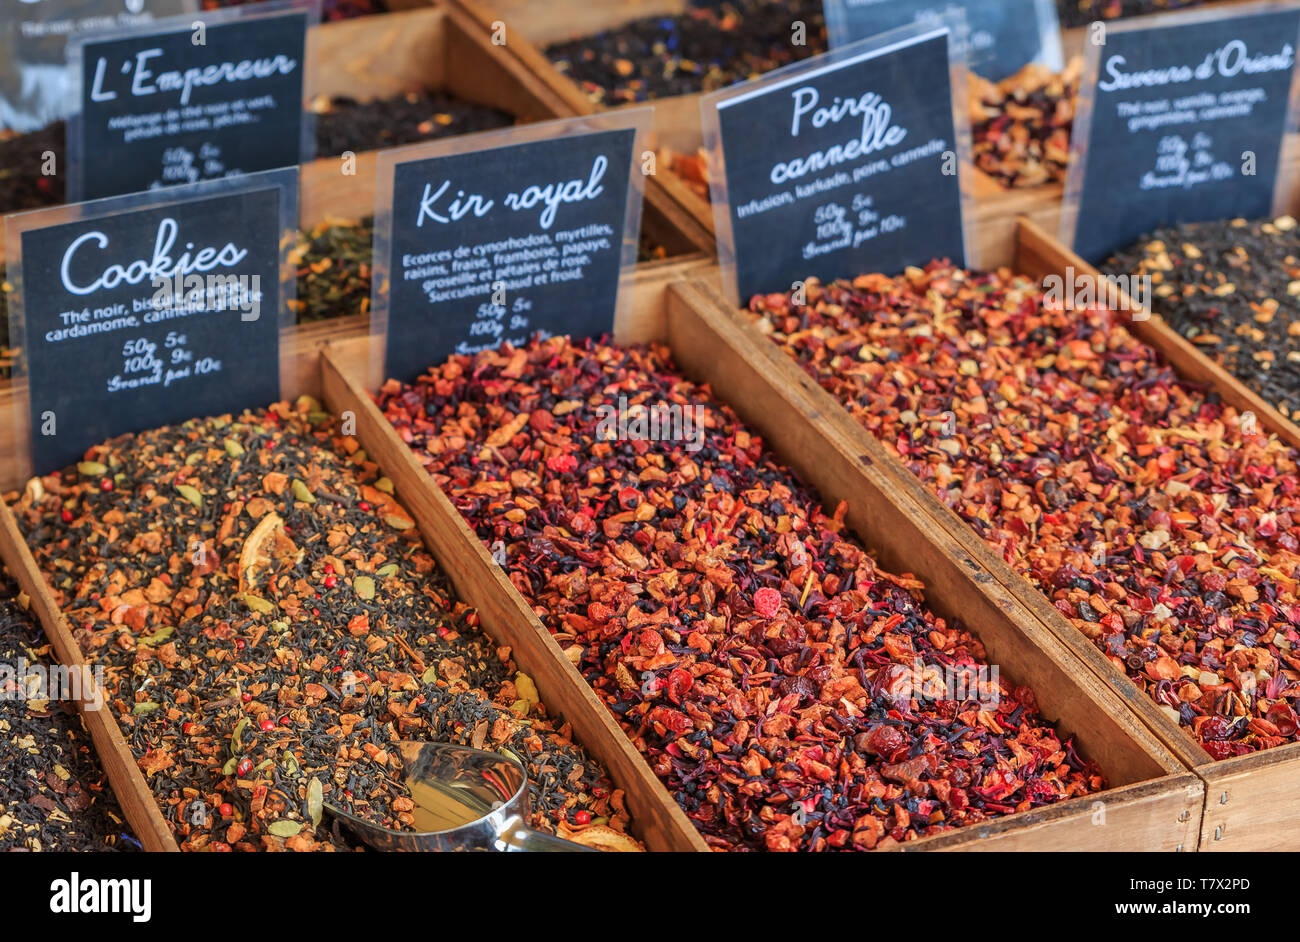 Exotic flavored teas with pear, cinnamon, kir royal, cookie and other flavors for sale at a local outdoor farmers market in Nice, France Stock Photo